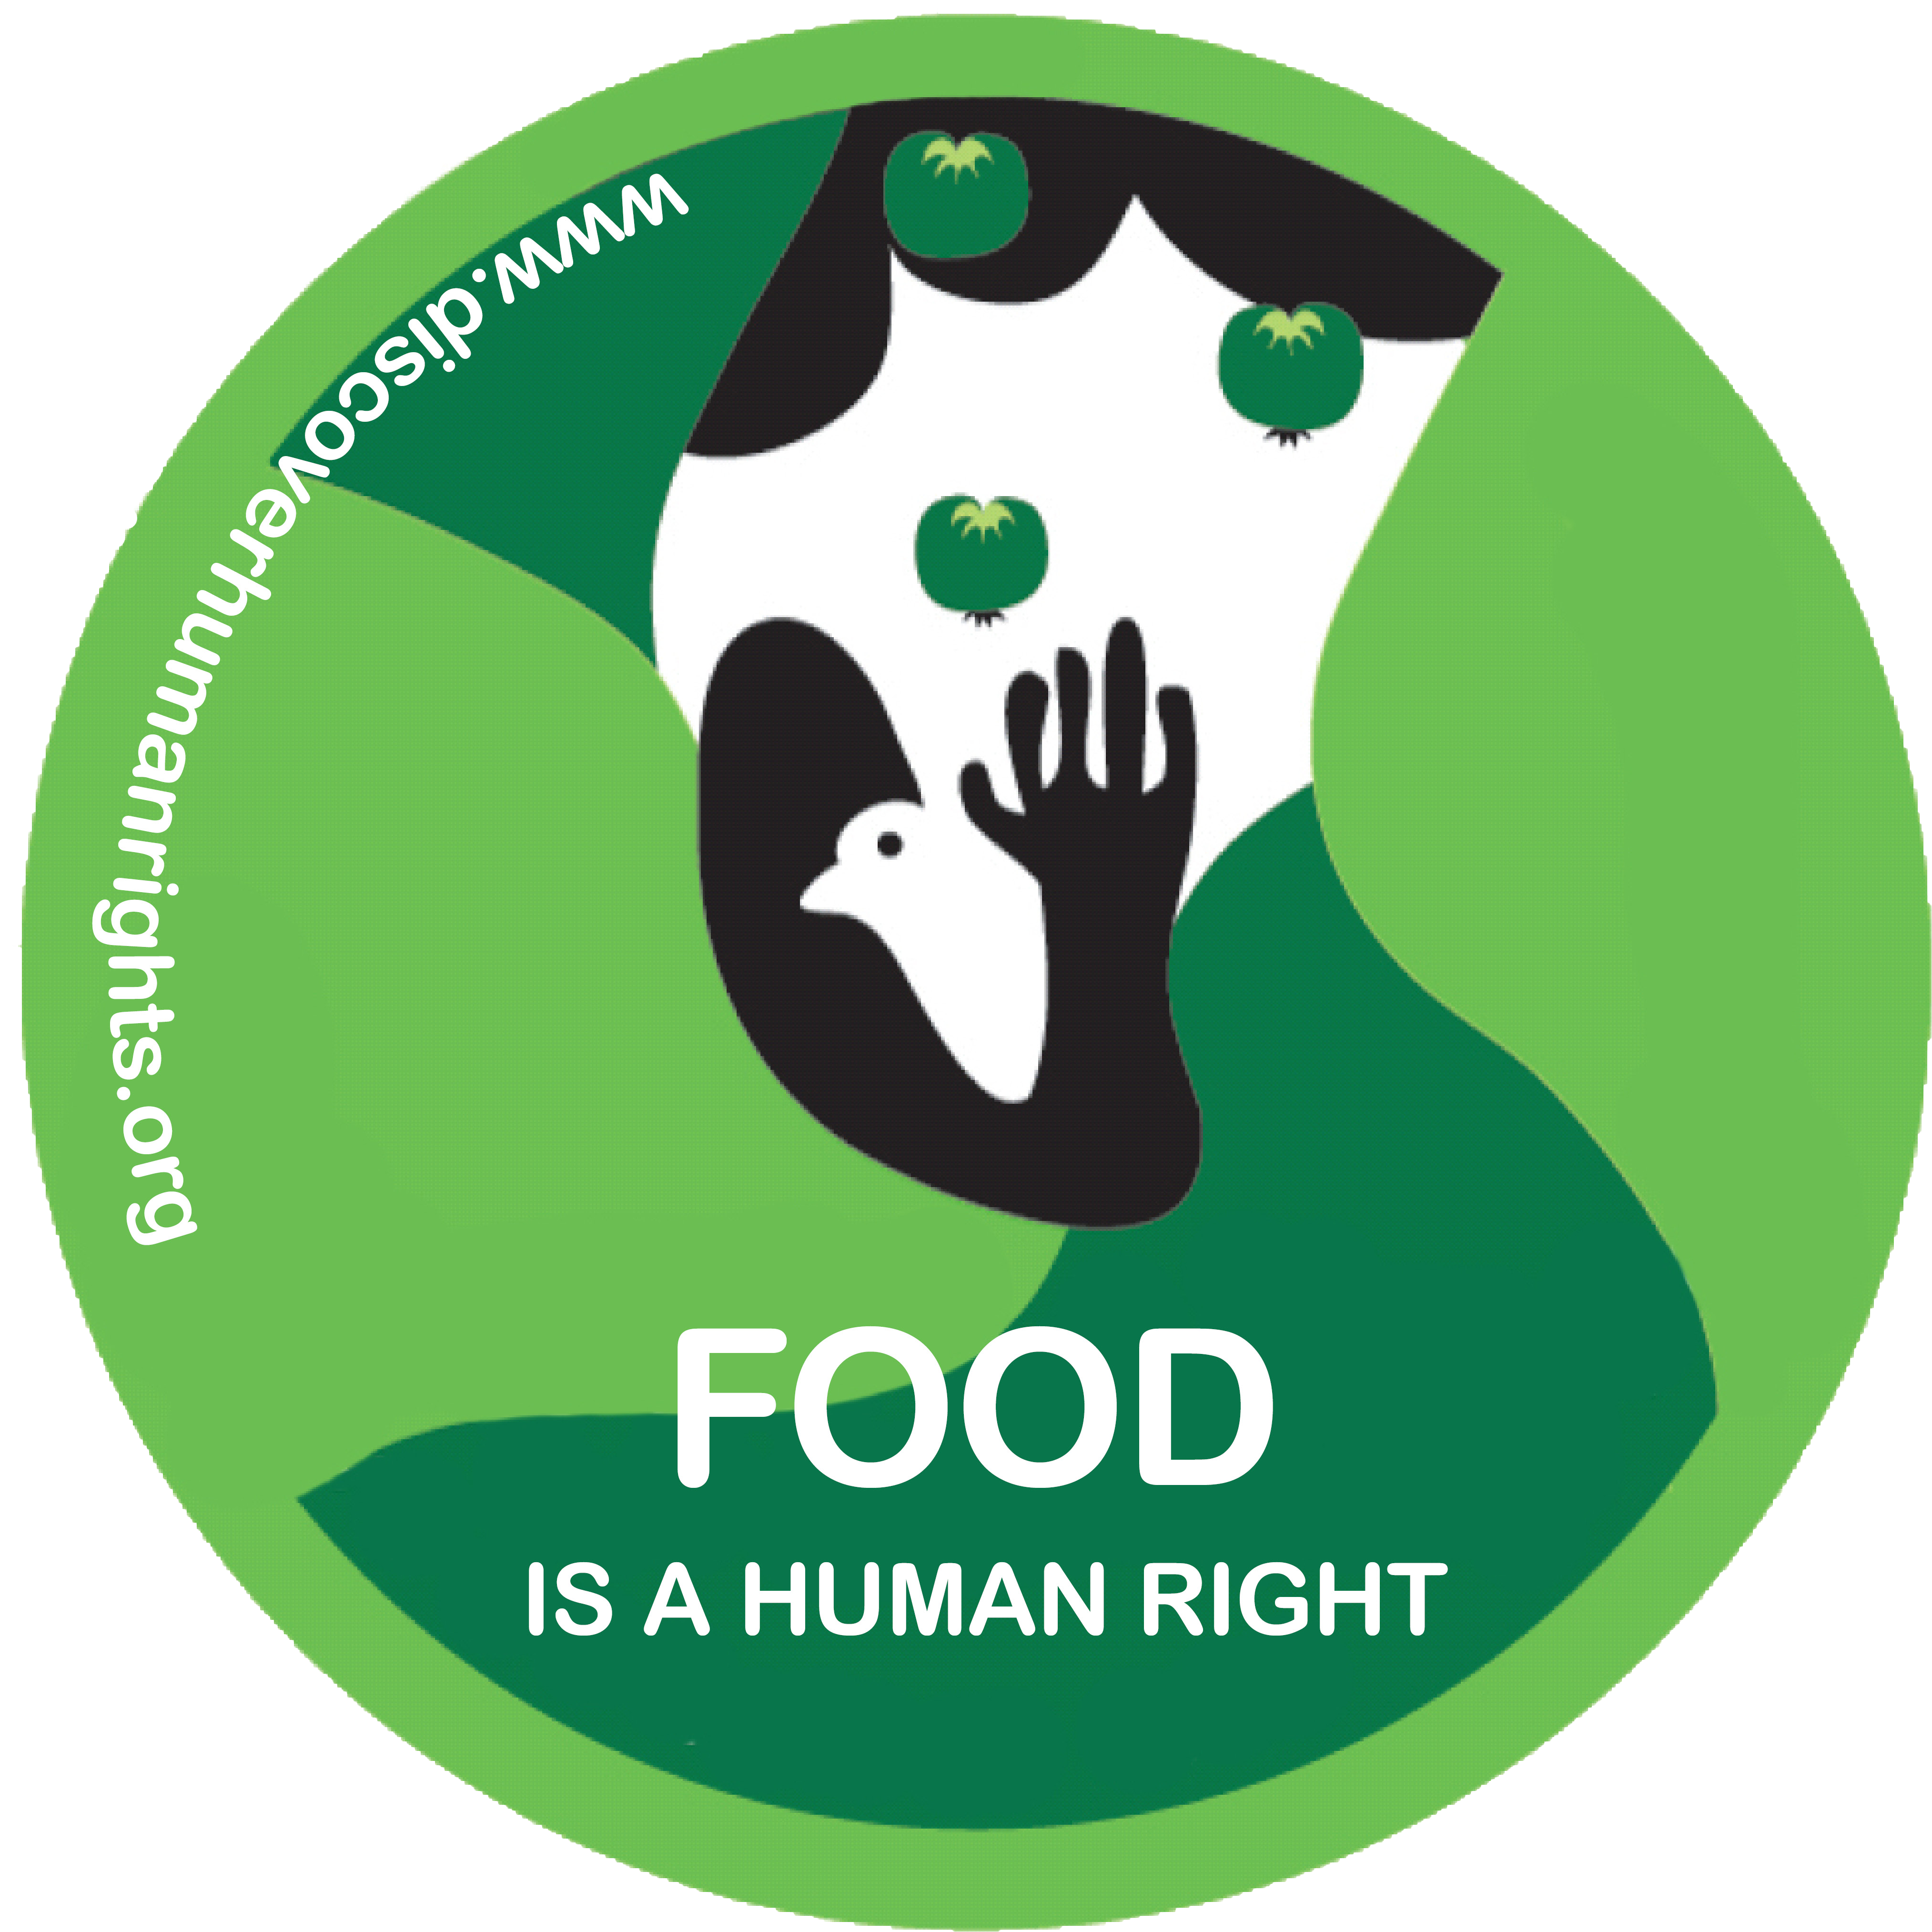 Food Is A Human Right 2 - Health Is A Human Right (4092x4086)